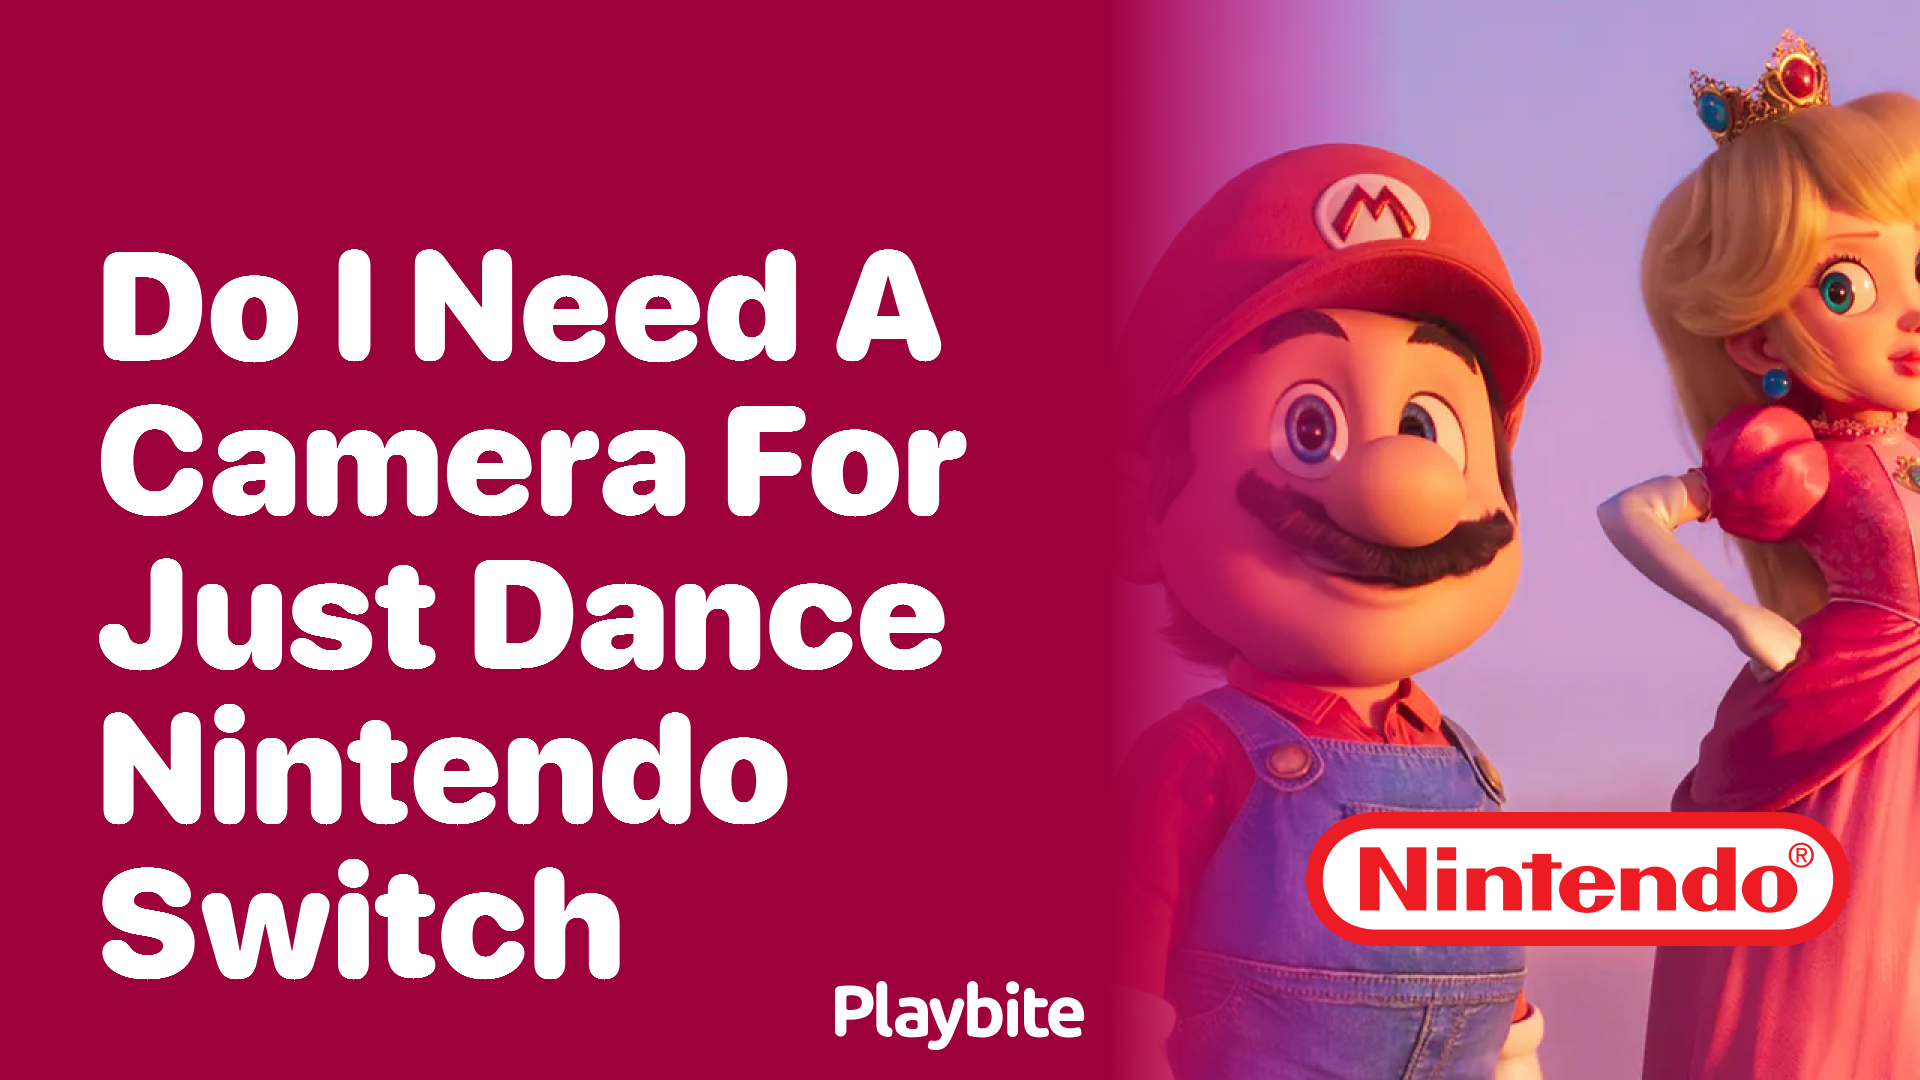 Do You Need a Camera for Just Dance on Nintendo Switch?